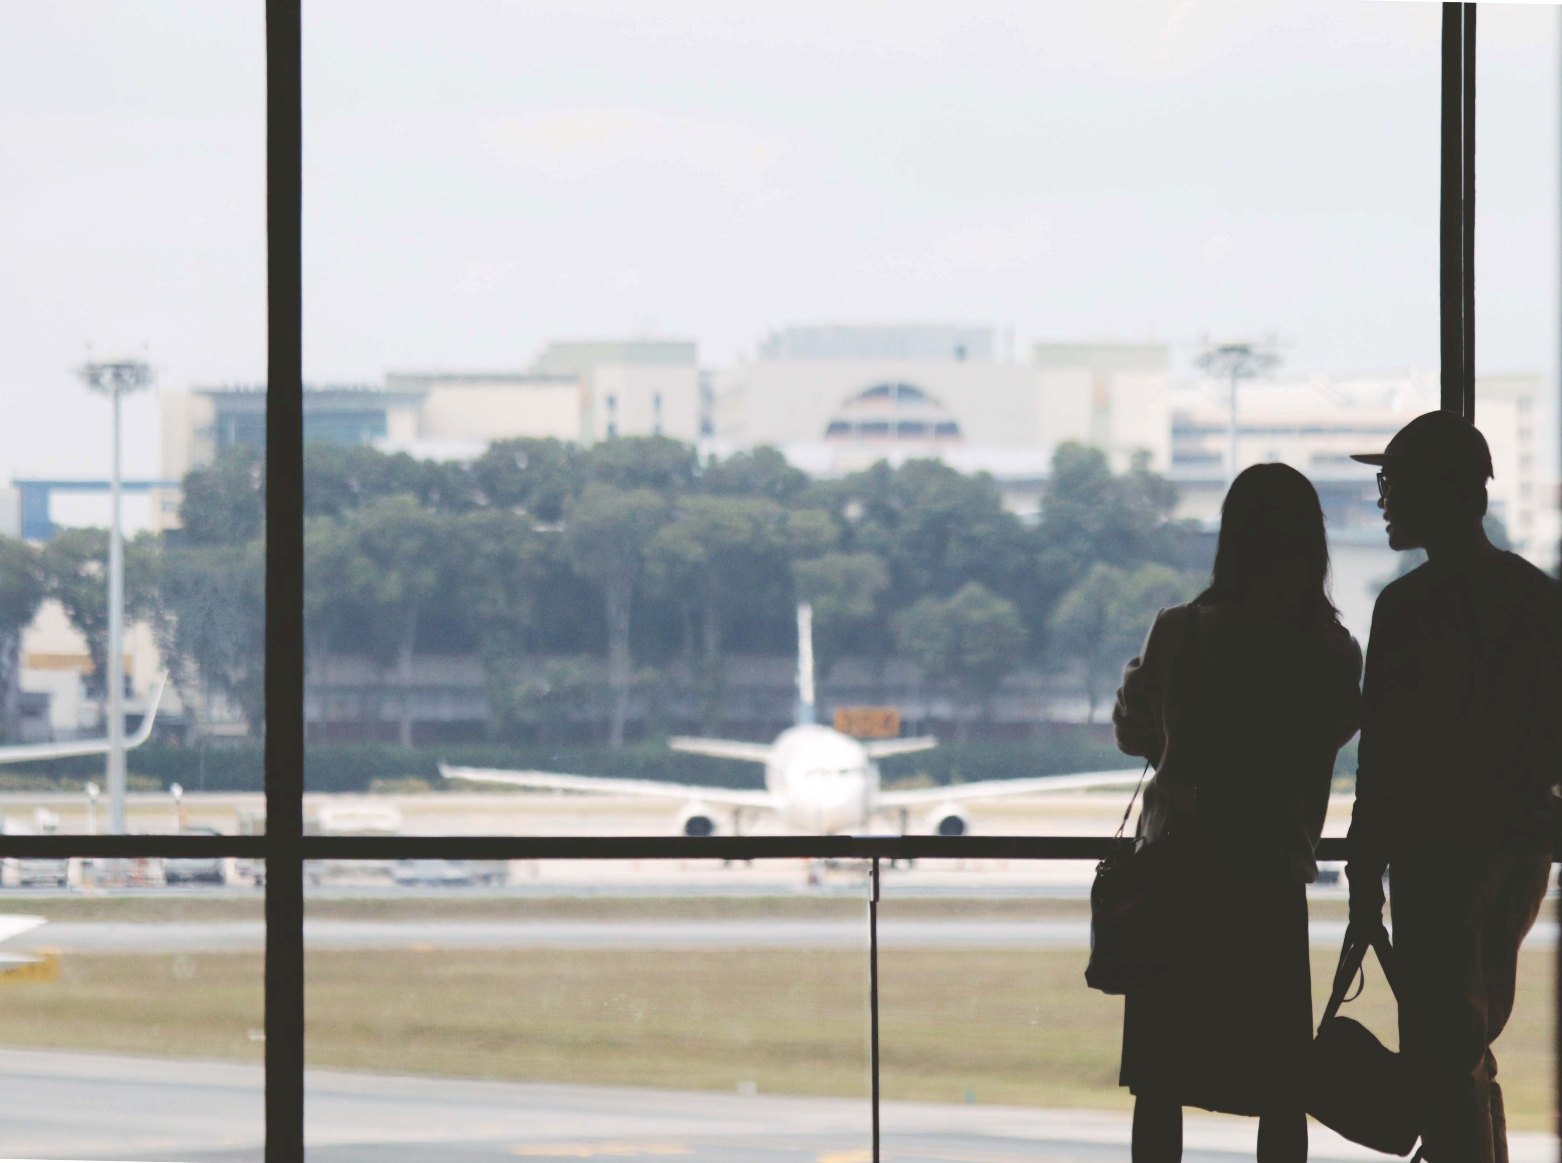 A couple standing in front of a window at the airport